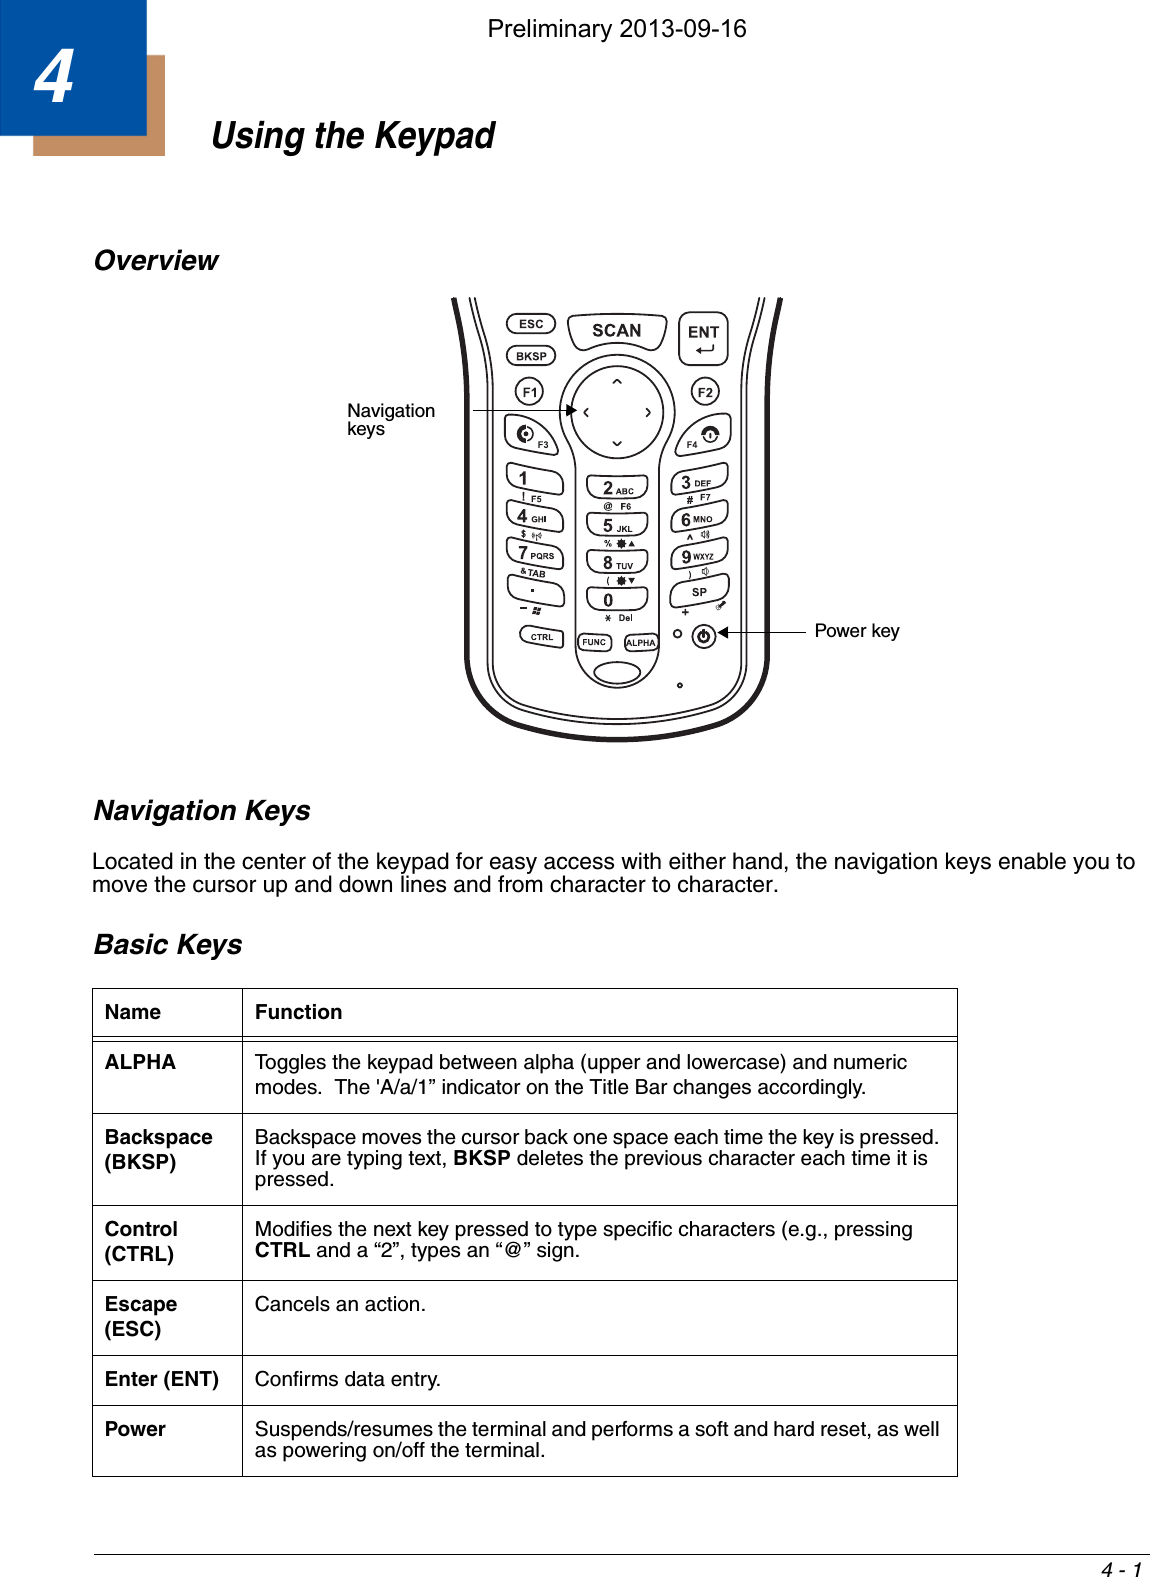 4 - 14Using the KeypadOverviewNavigation KeysLocated in the center of the keypad for easy access with either hand, the navigation keys enable you to move the cursor up and down lines and from character to character. Basic KeysName FunctionALPHA  Toggles the keypad between alpha (upper and lowercase) and numeric modes.  The &apos;A/a/1” indicator on the Title Bar changes accordingly.Backspace (BKSP)Backspace moves the cursor back one space each time the key is pressed. If you are typing text, BKSP deletes the previous character each time it is pressed.Control(CTRL)Modifies the next key pressed to type specific characters (e.g., pressing CTRL and a “2”, types an “@” sign.Escape (ESC)Cancels an action.Enter (ENT) Confirms data entry.Power Suspends/resumes the terminal and performs a soft and hard reset, as well as powering on/off the terminal. Navigation keysPower keyPreliminary 2013-09-16